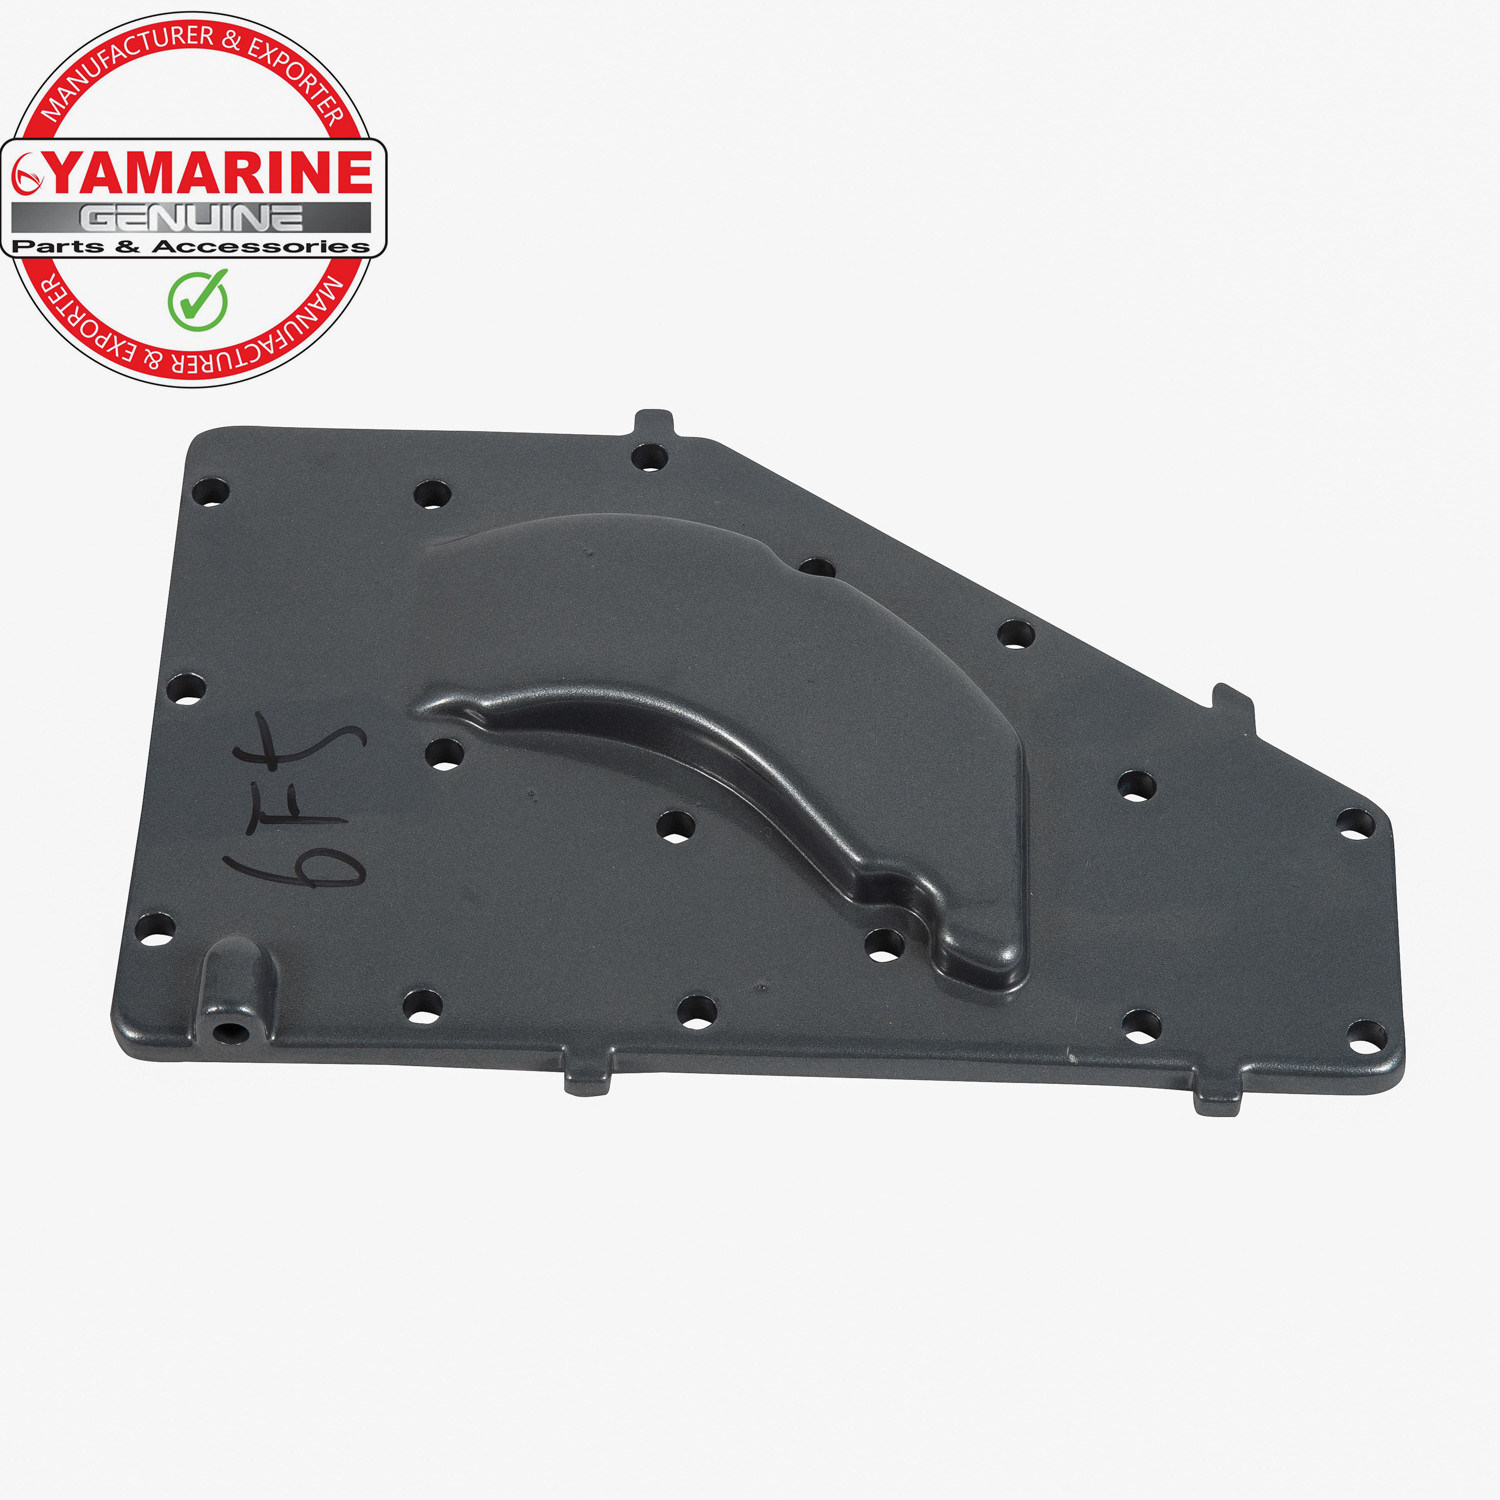 E40g 40HP YAMAHA Outboard Outer Cover, Exhaust 6f5-41113-01-1s, 6f5-41111-01-1s Inner Cover, Exhaust